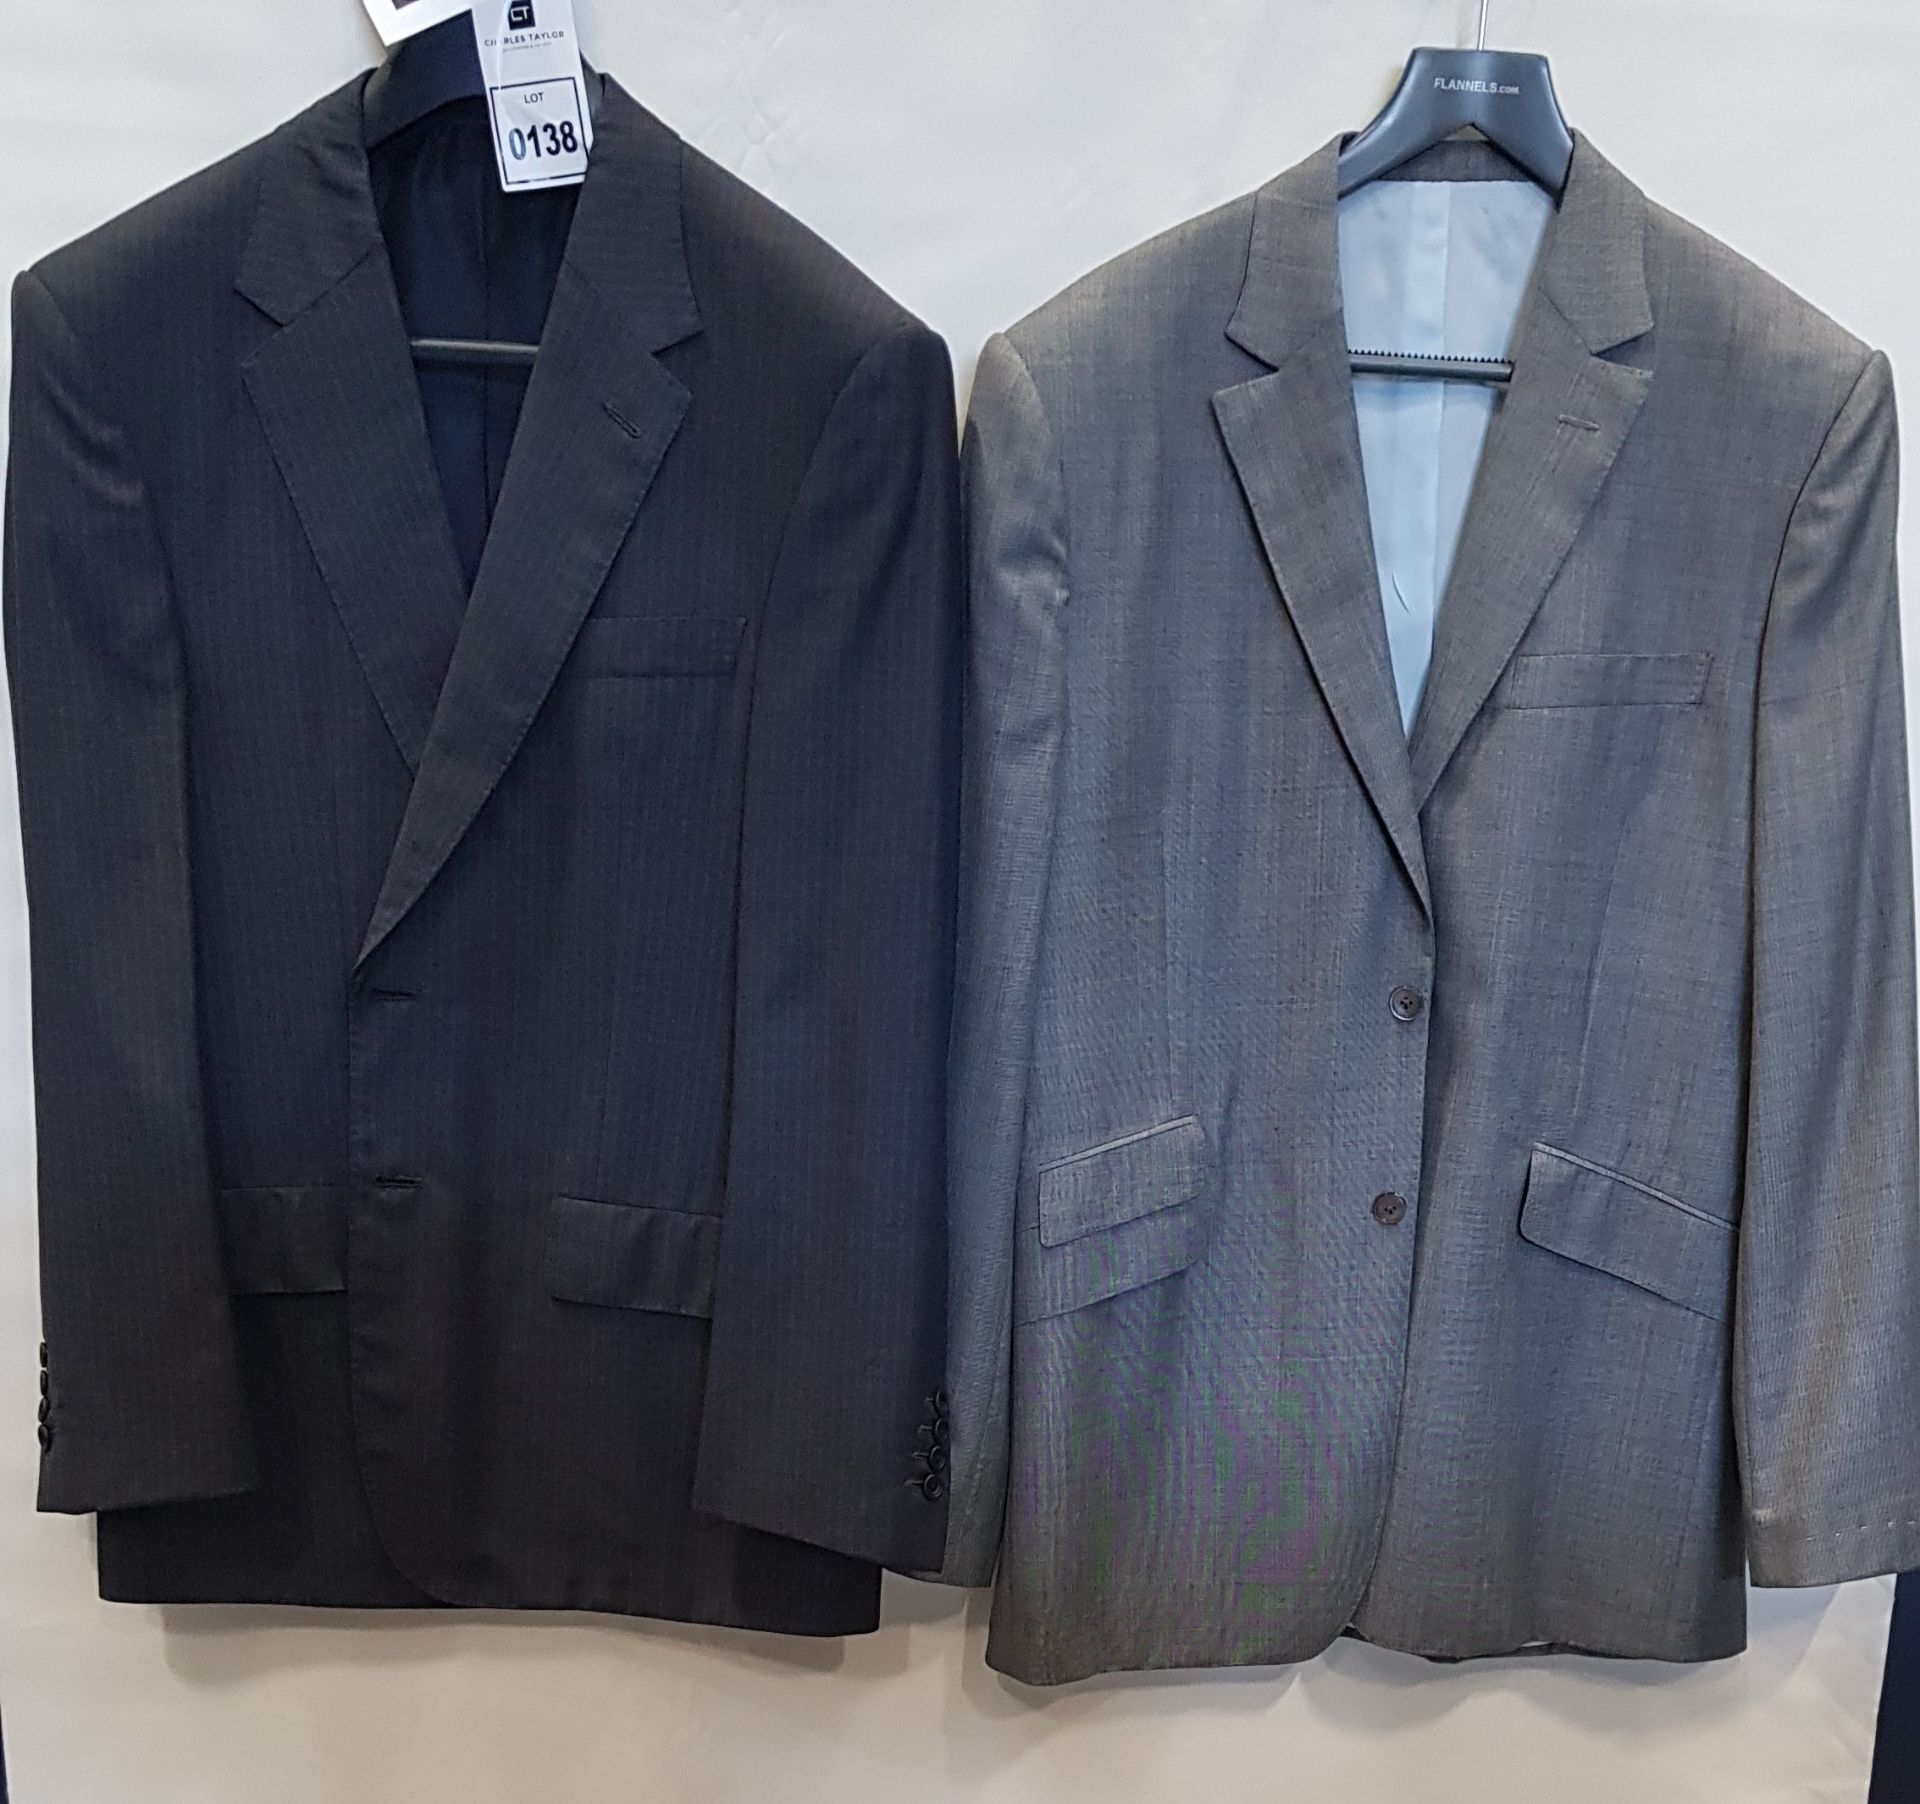 5 X BRAND NEW LUTWYCHE GREY JACKETS IN VARIOUS SIZES & STYLES (NOTE NOT FULLY TAILORED)